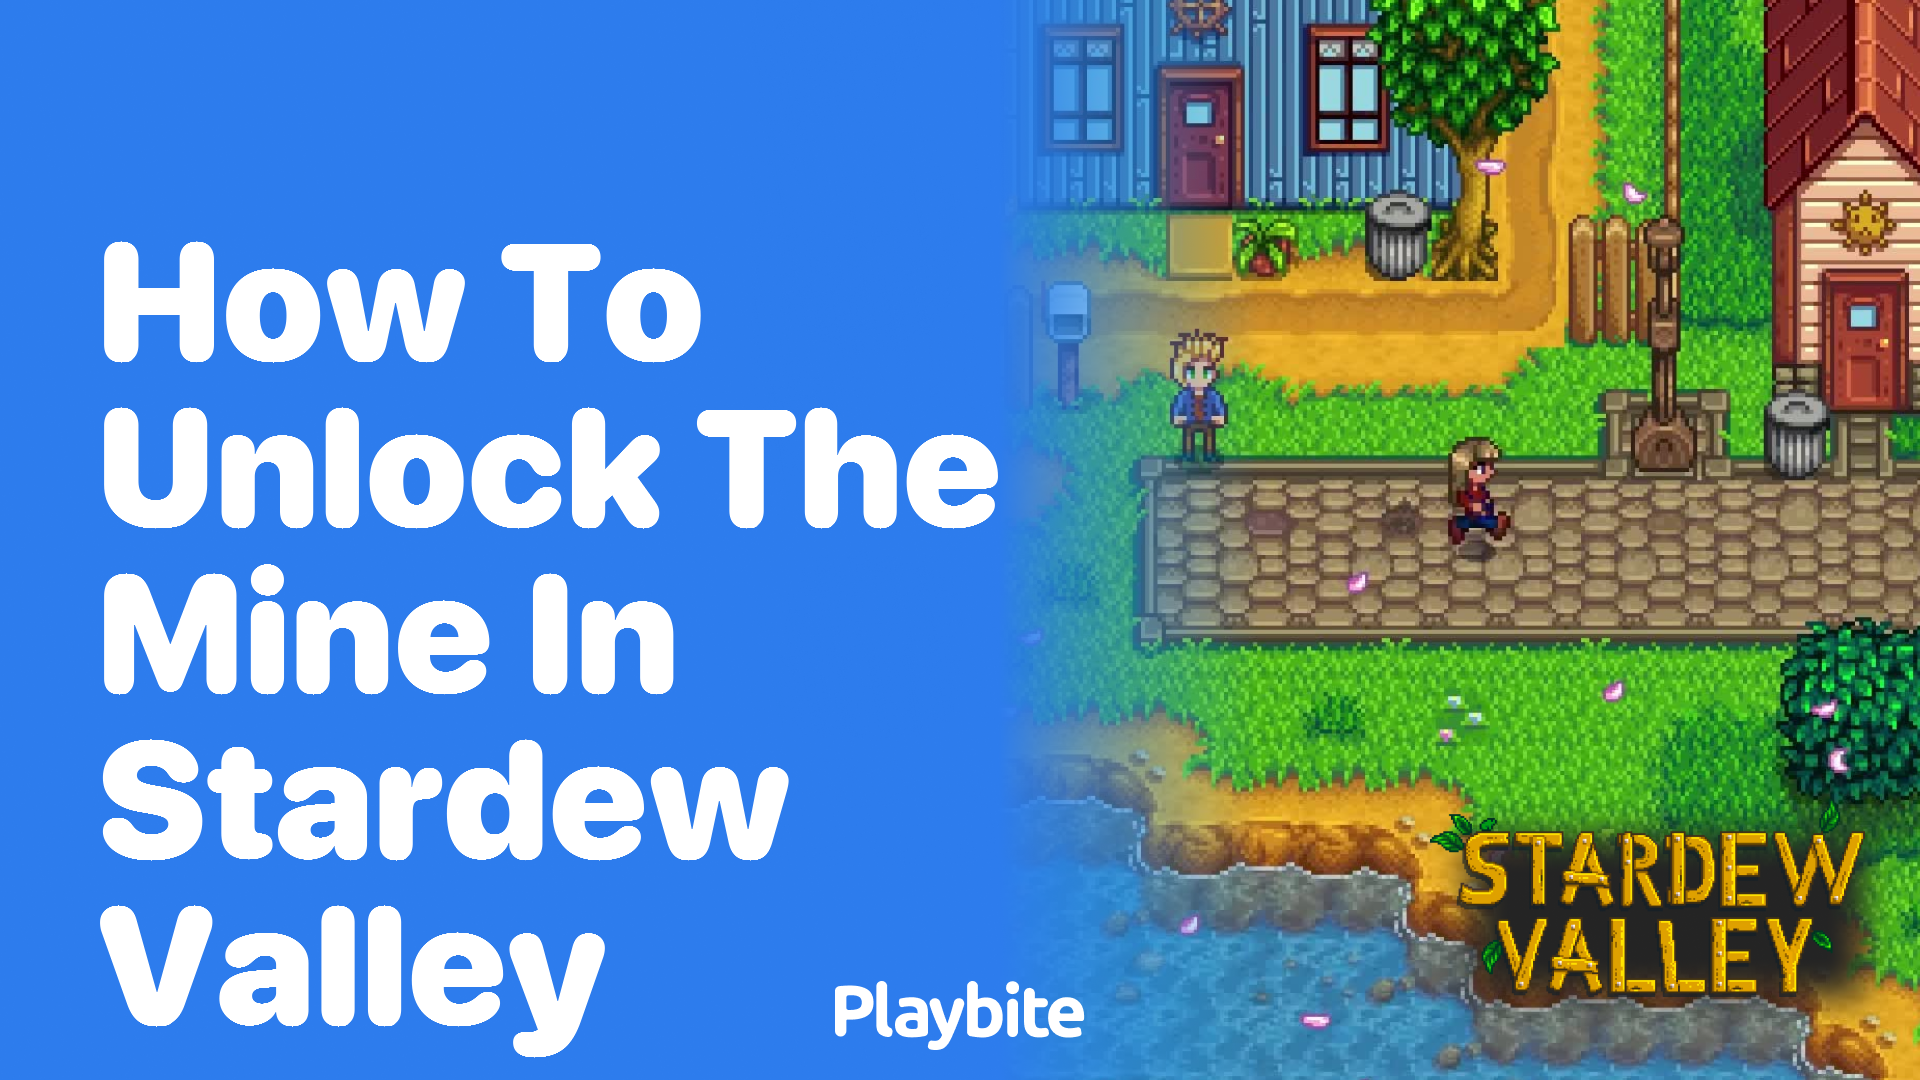 How to Unlock the Mine in Stardew Valley